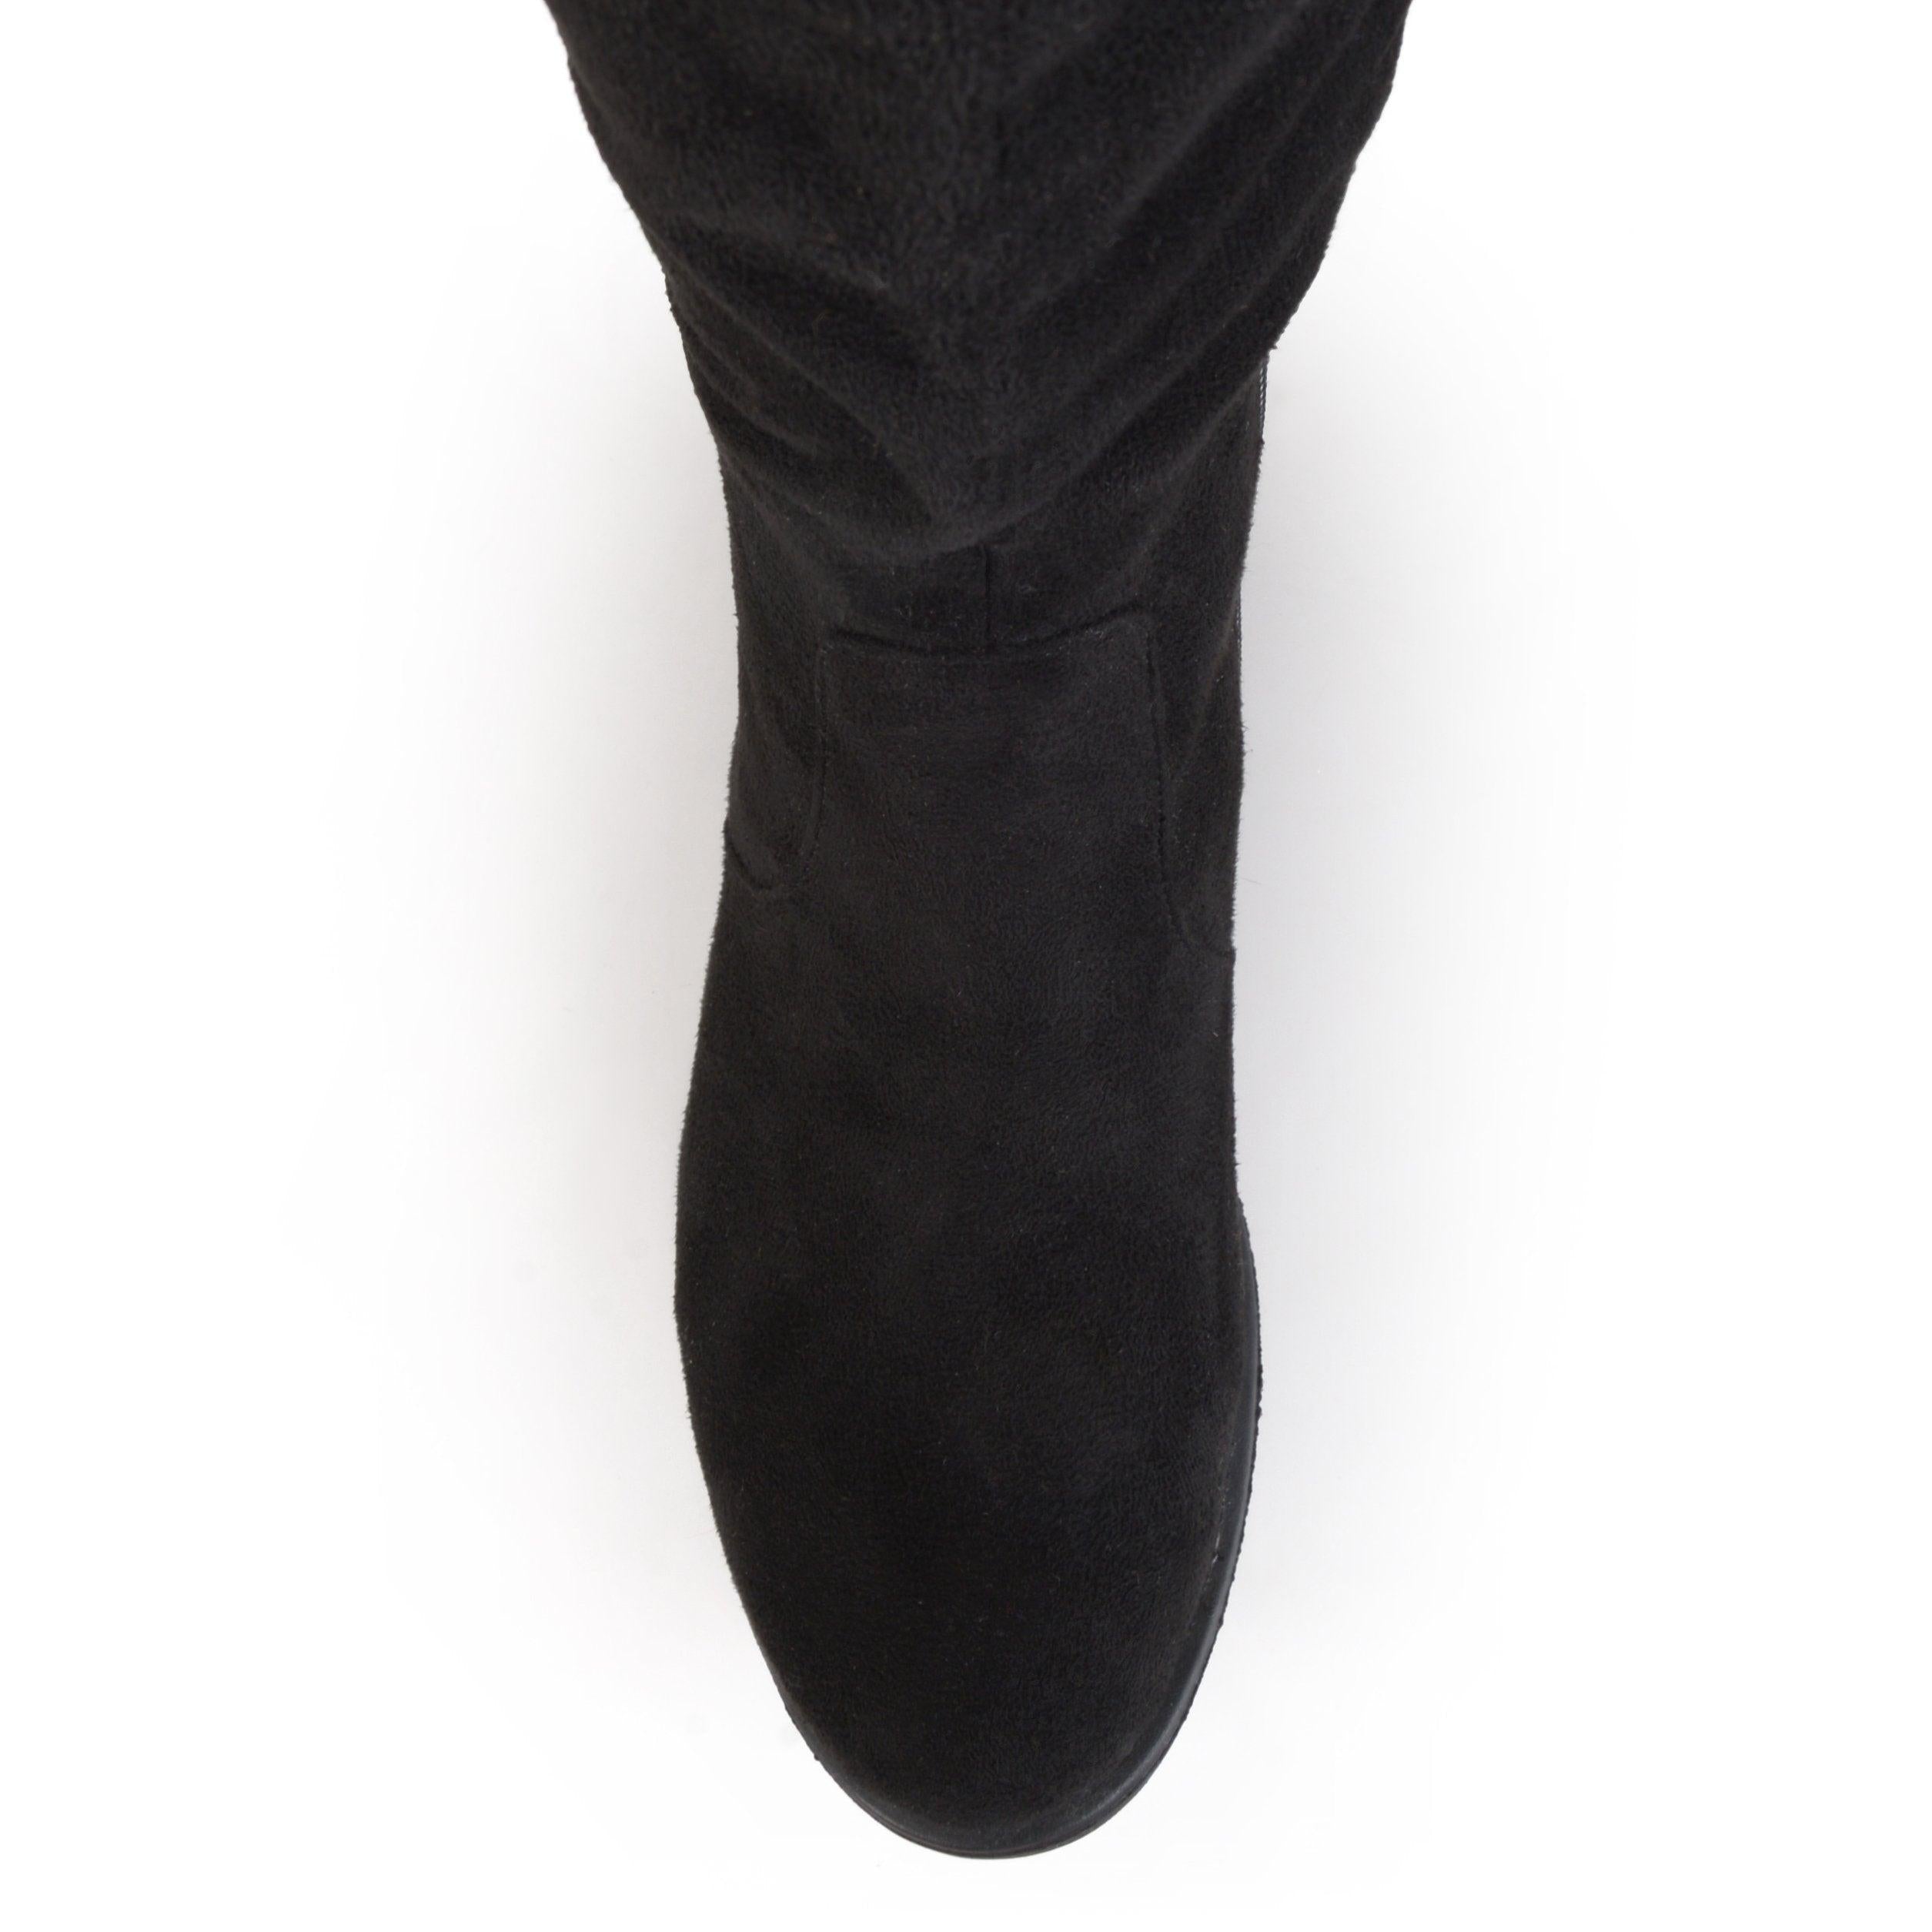 Mount Boots | Women's Knee High Boots | Journee Collection